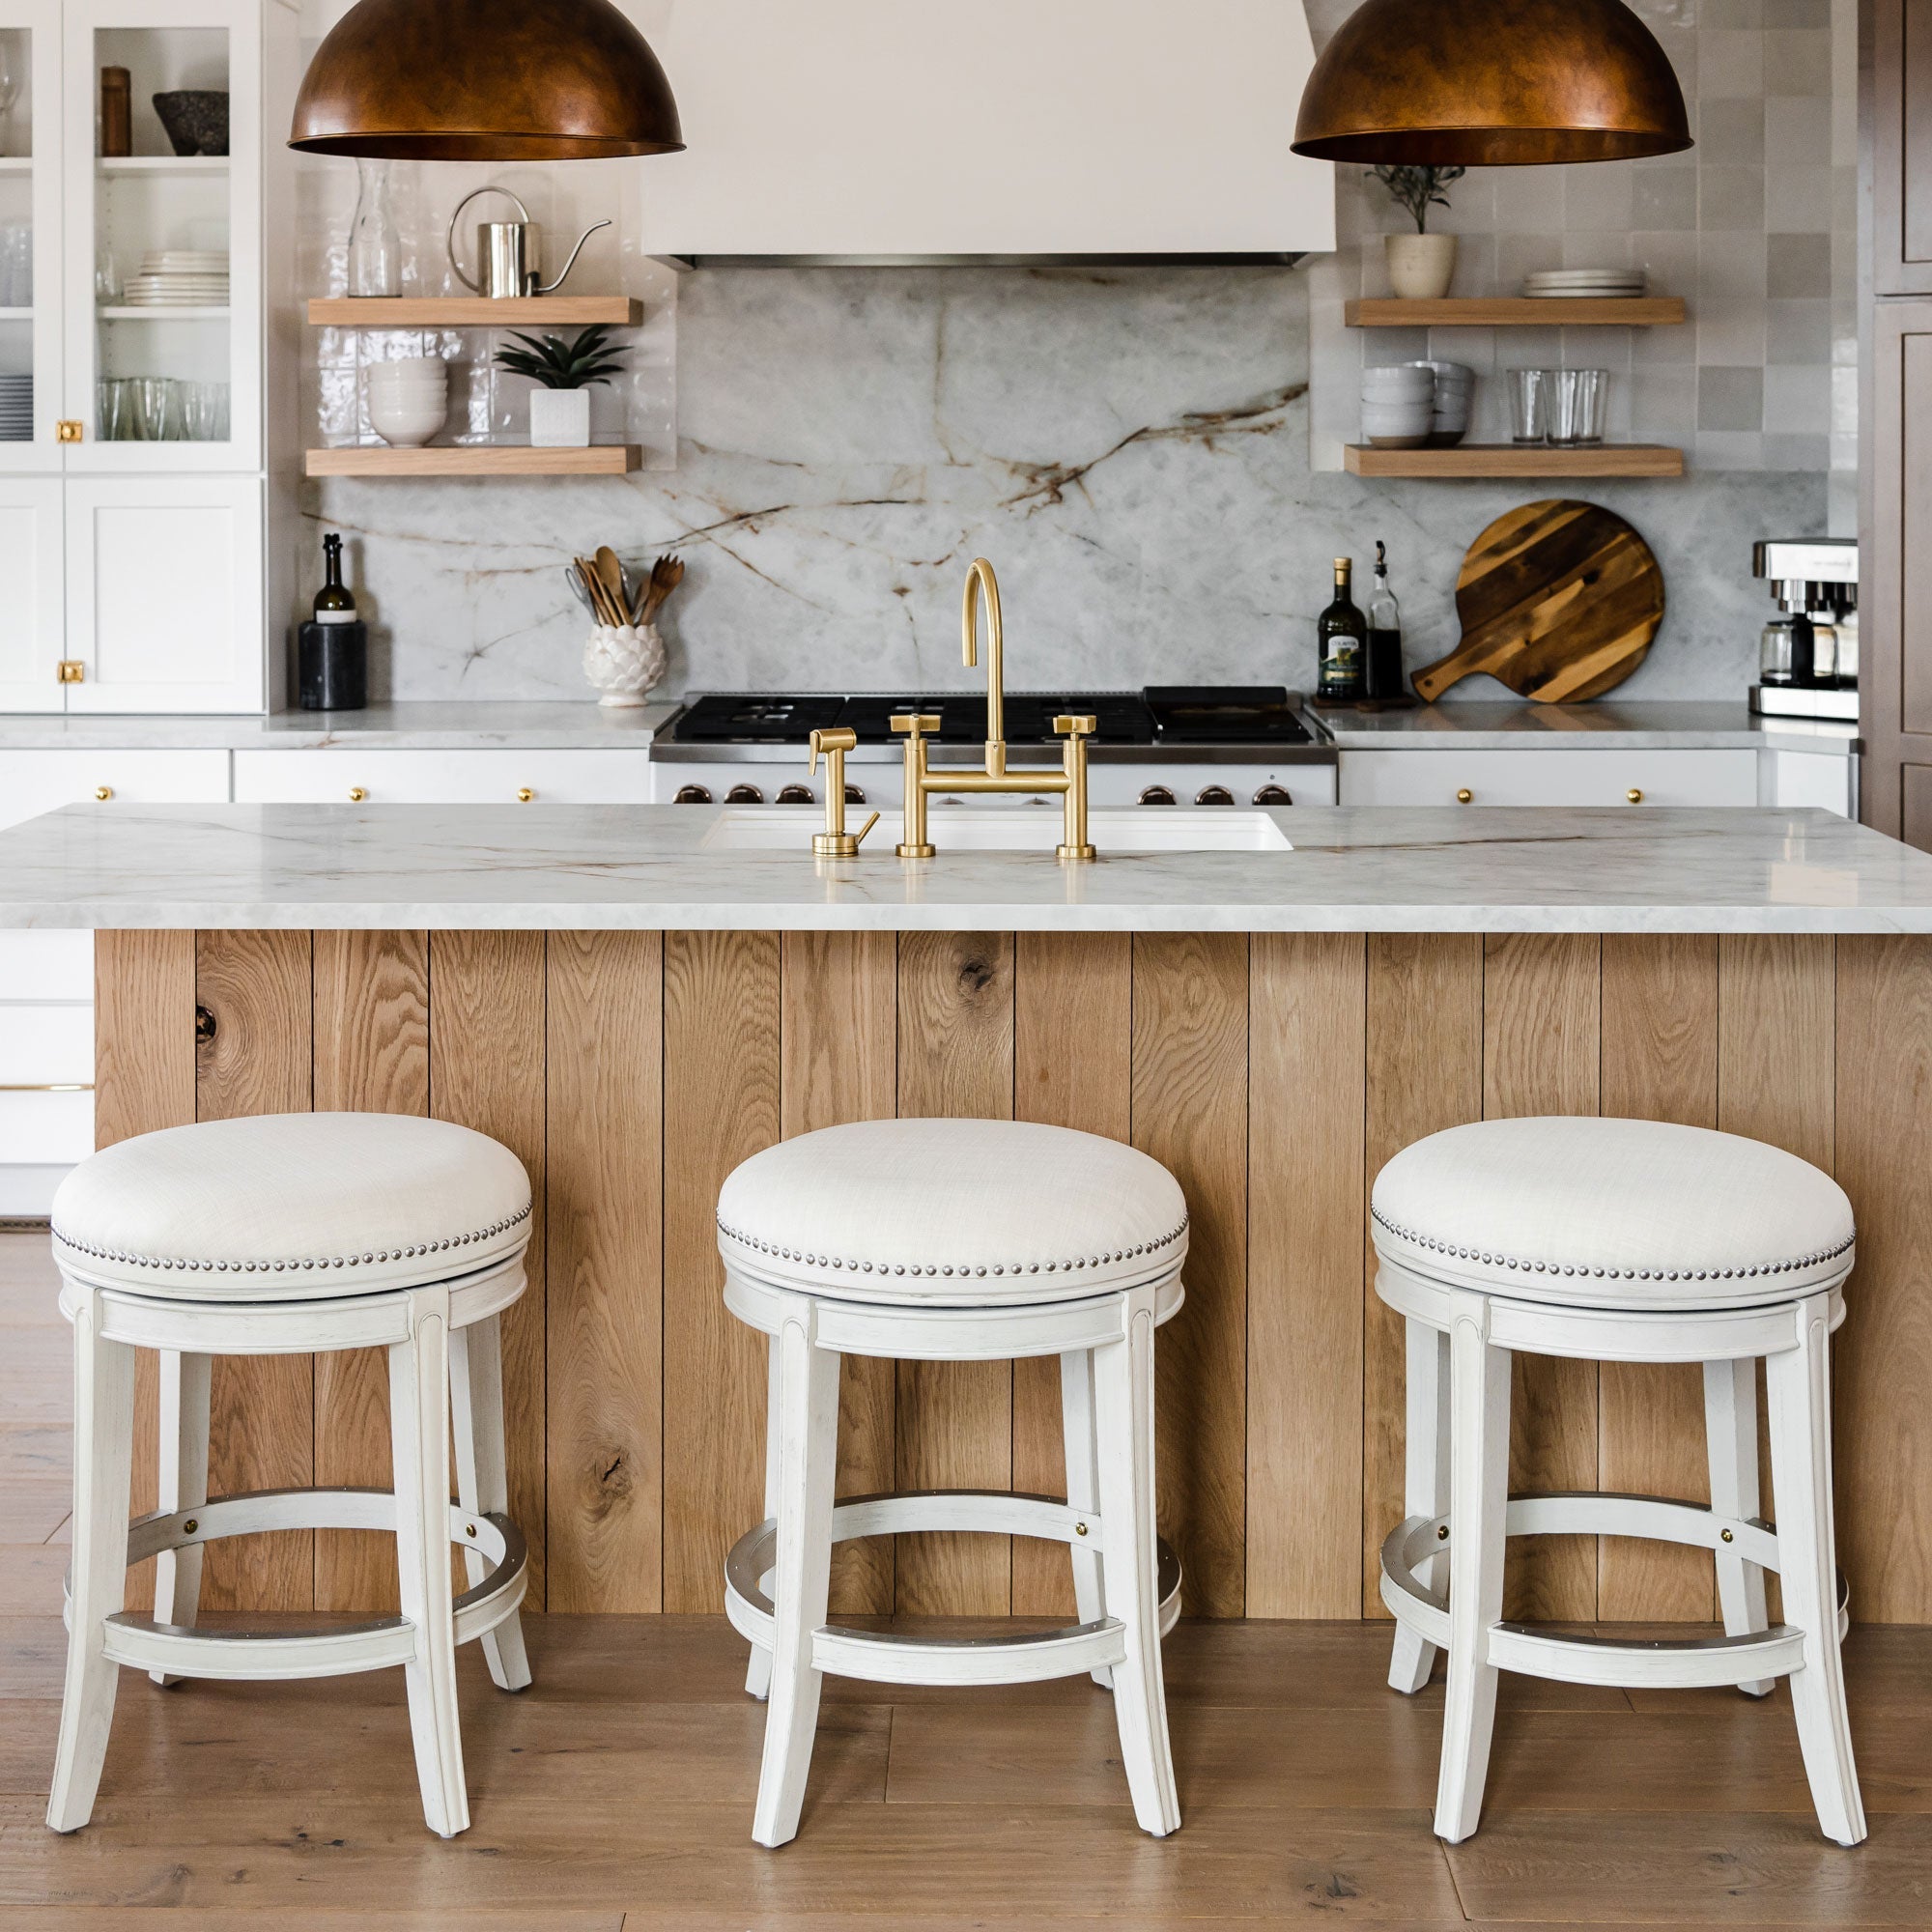 Alexander Backless Counter Stool in White Oak Finish with Natural Color Fabric Upholstery in Stools by Maven Lane